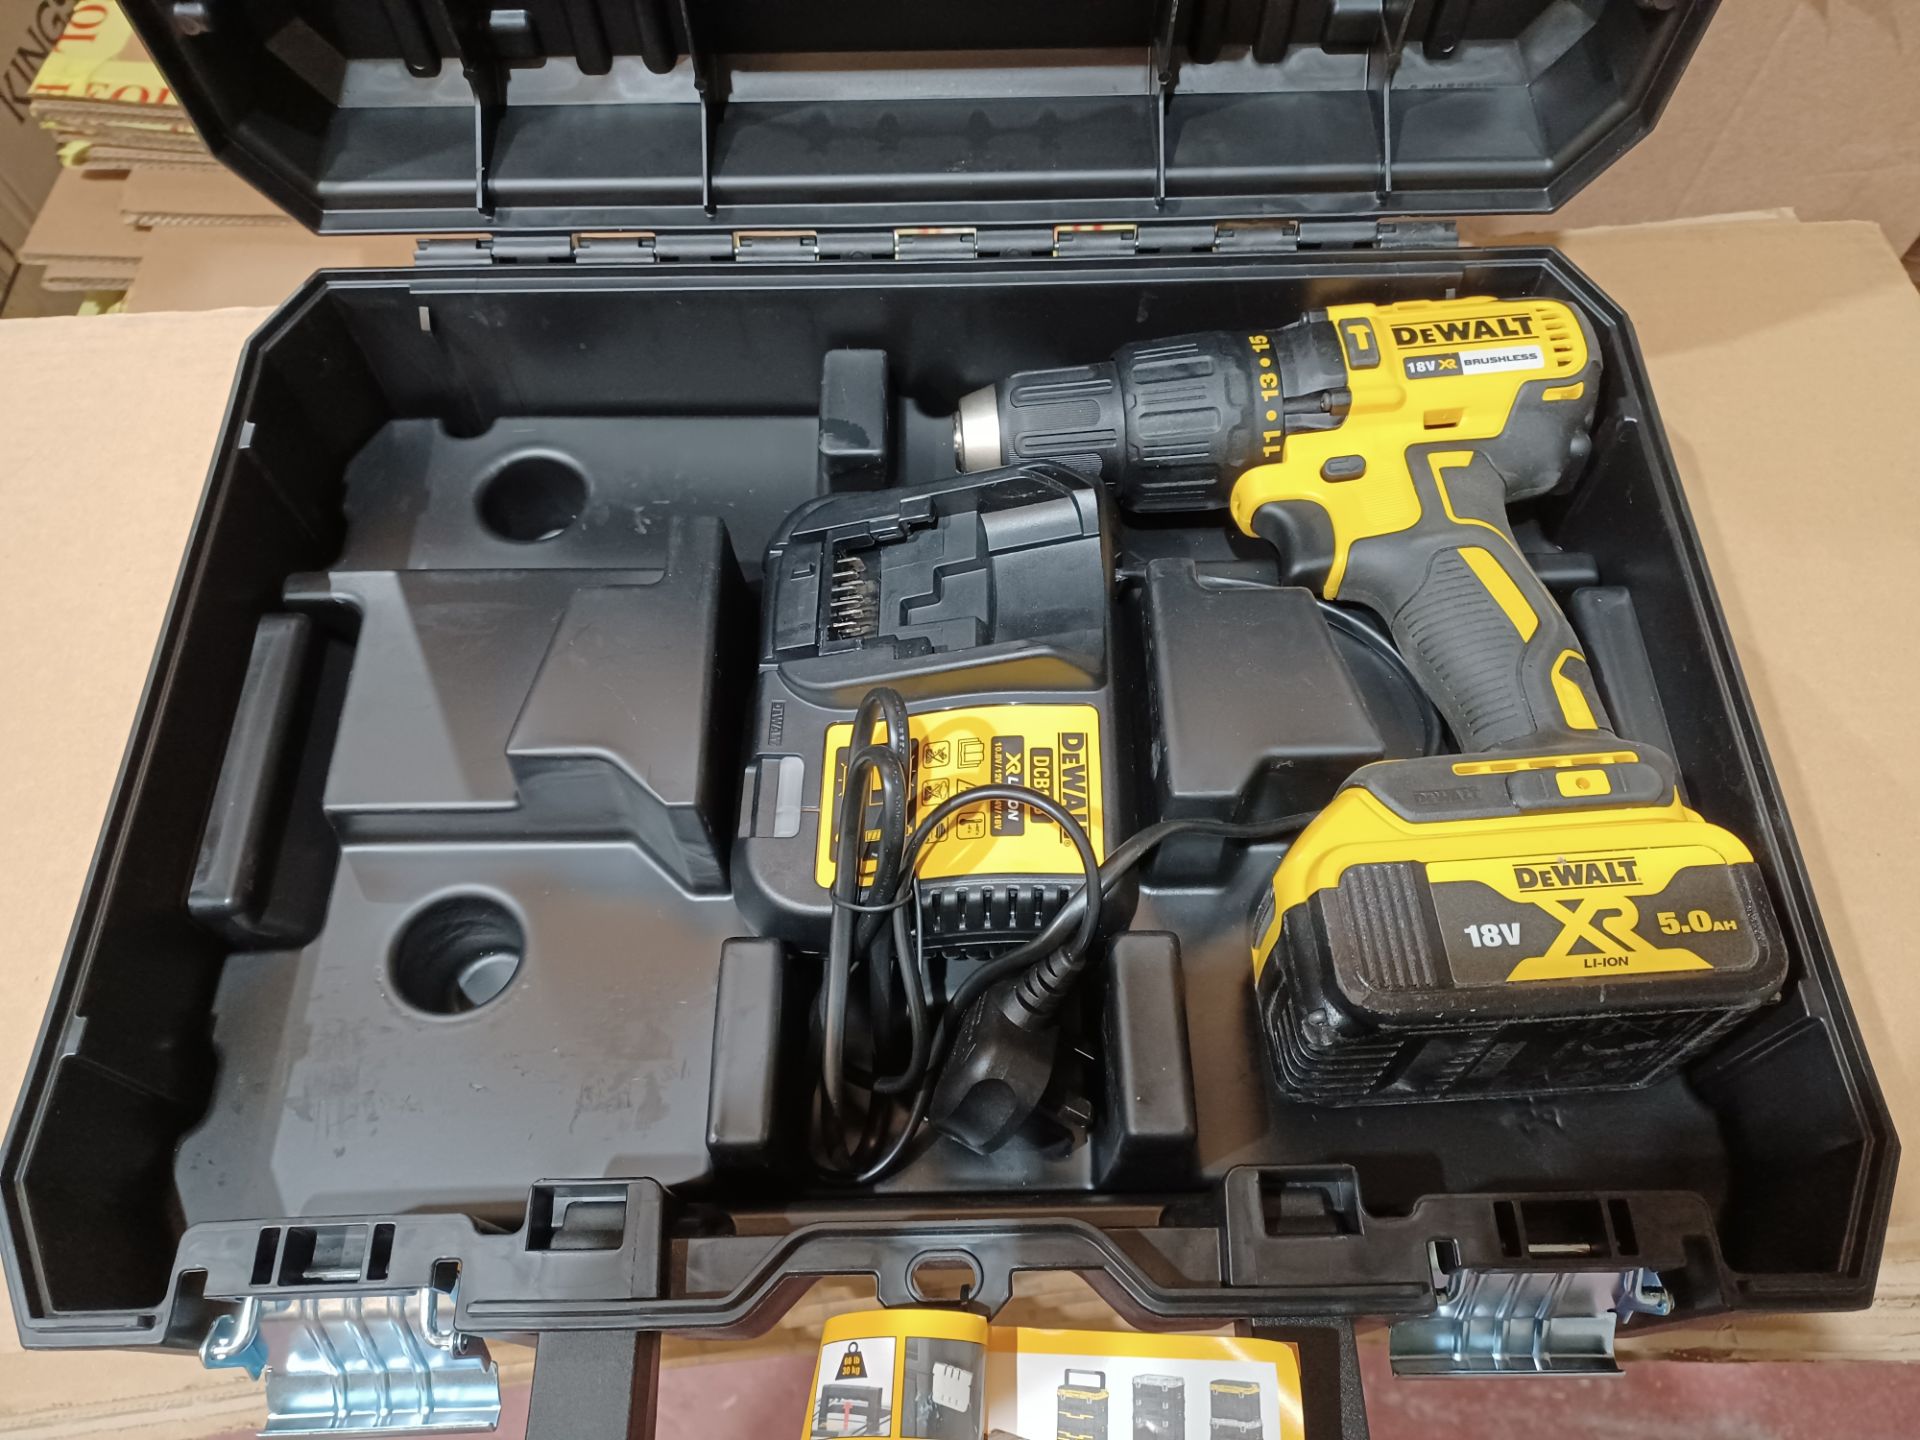 DEWALT DCD778D2T-SFGB 18V 2.0AH LI-ION XR BRUSHLESS CORDLESS COMBI DRILL WITH 1 BATTERY CHARGER